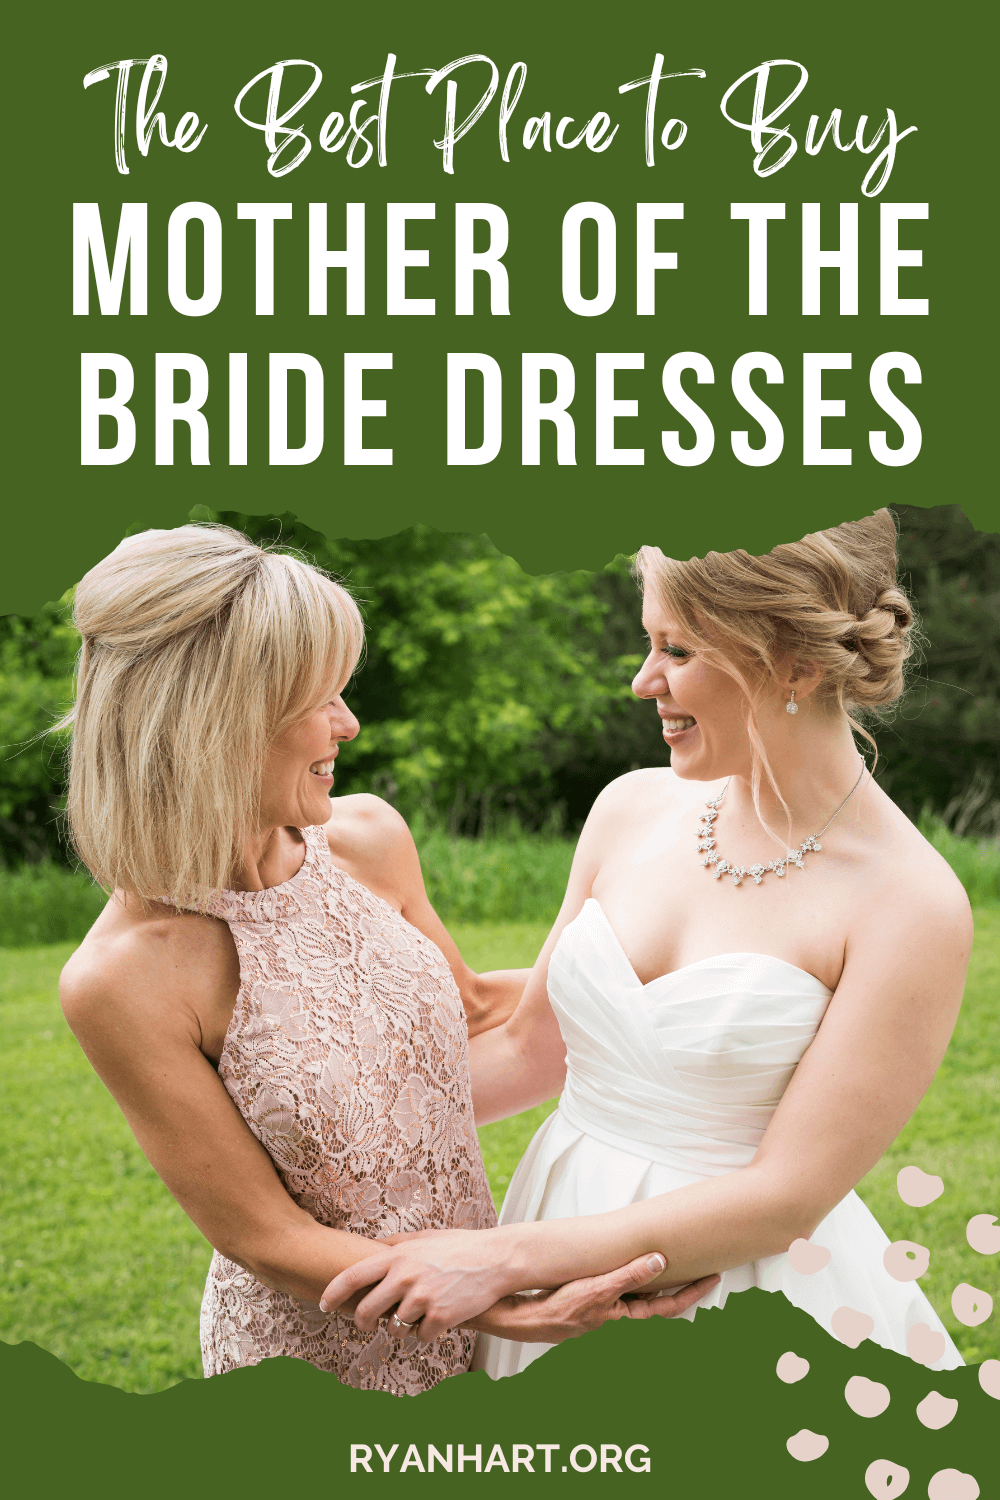 Mother of the bride wearing a dress